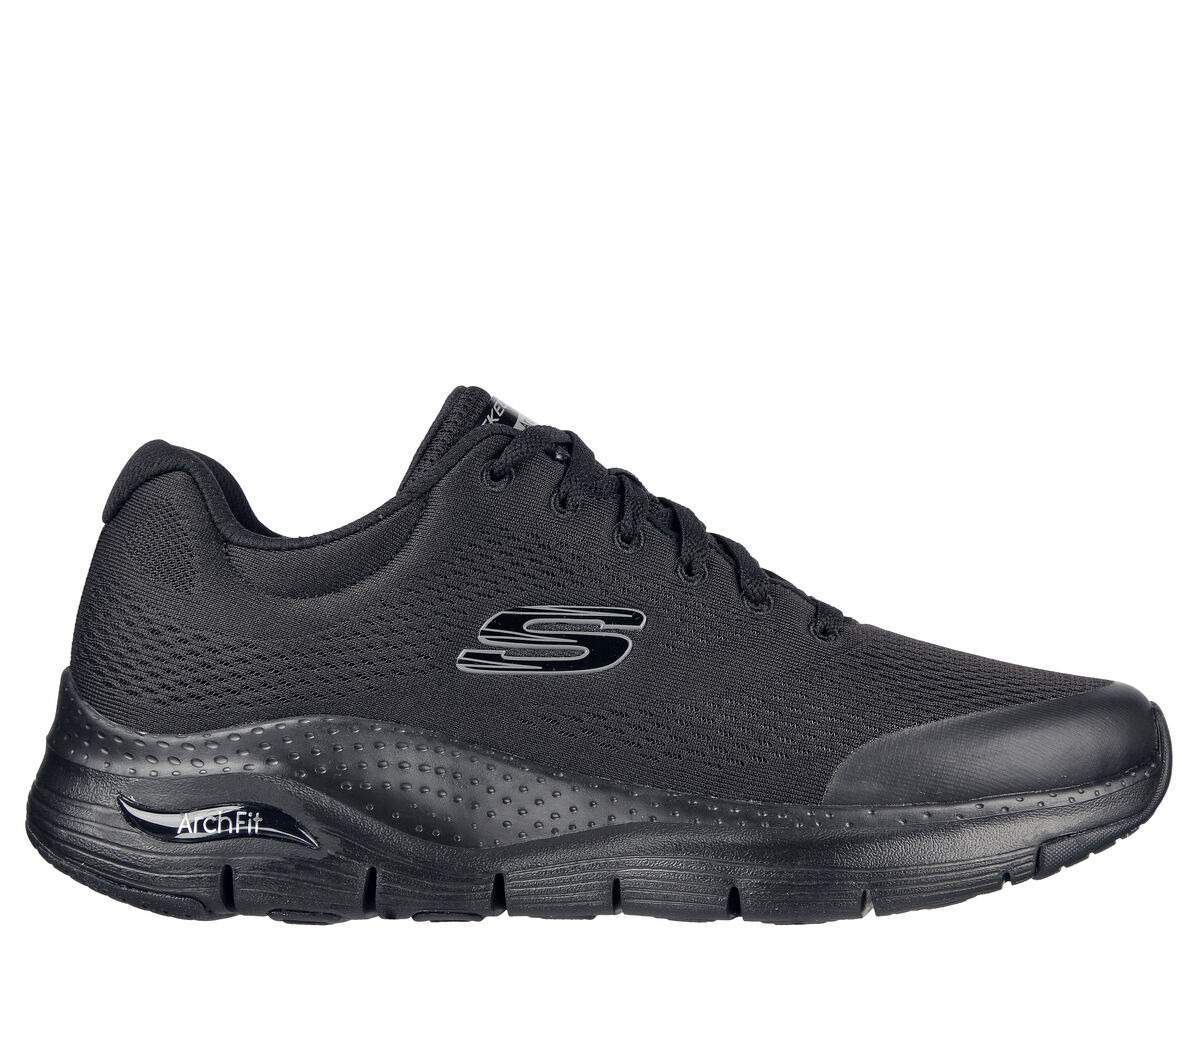 What Are Skechers Arch Fit Good for?